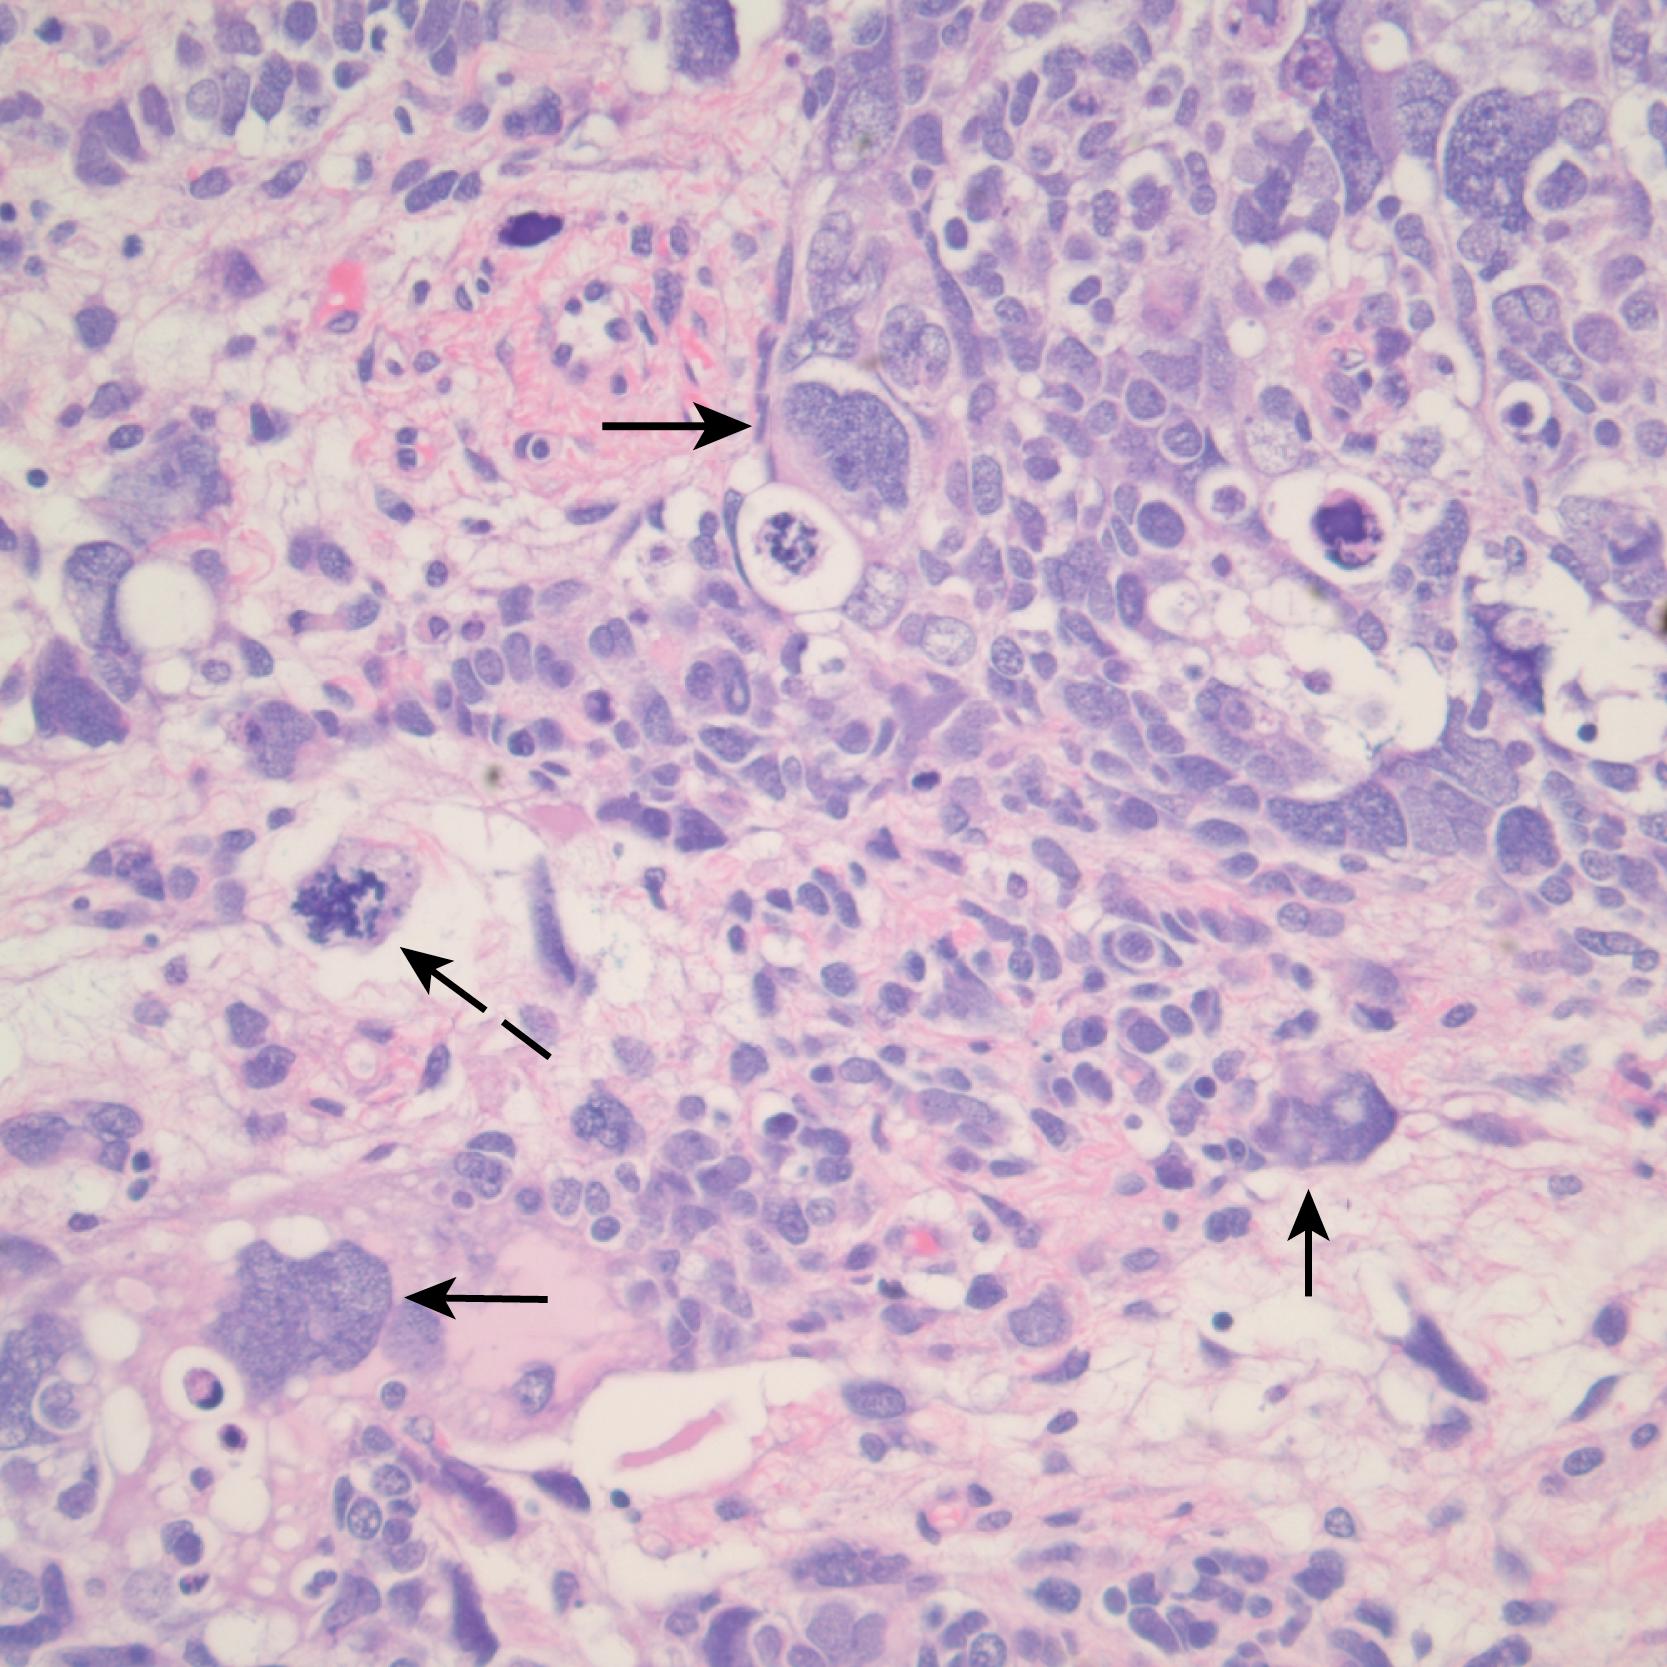 Fig. 64.5, Salient features of the anaplastic Wilms tumor variant with H&E staining. Anaplasia is defined by three requisite criteria that are all depicted in the image: atypical mitotic figures (dotted arrow) (often tripolar or multipolar), nuclear enlargement (solid arrows) to greater than three times the size of resident cell nuclei of the same type, and nuclear hyperchromicity present in some of the cells. Enlargement and hyperchromicity reflect the fact that anaplastic WTs contain nearly twice the amount of DNA as normal cells with duplication of many whole chromosomes in each cell.